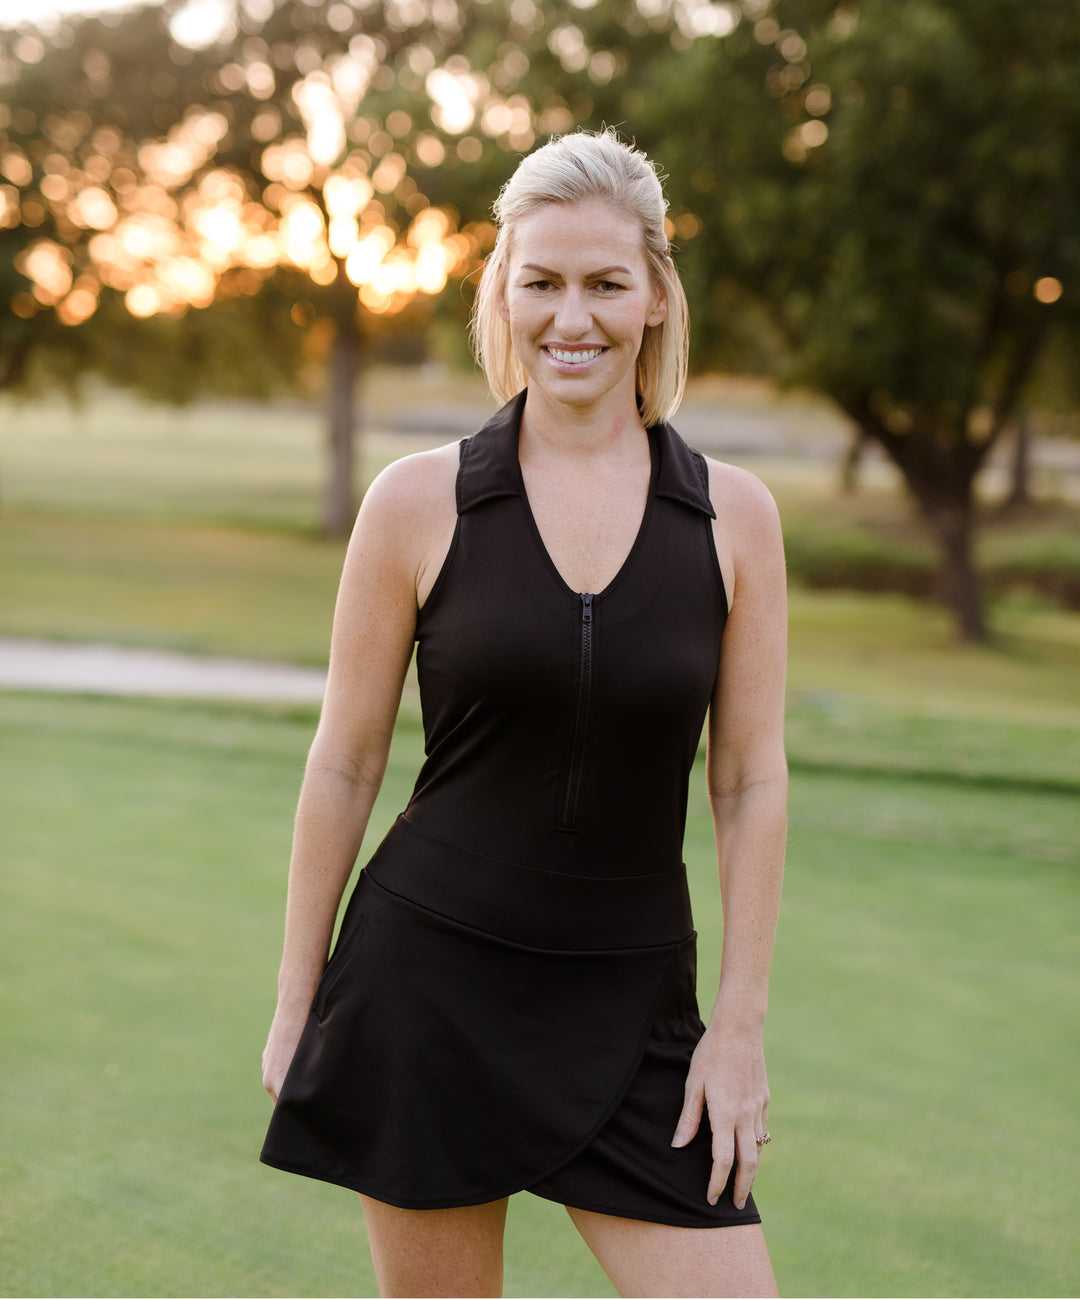 Shoppers Love The Baleaf Golf and Tennis Dress